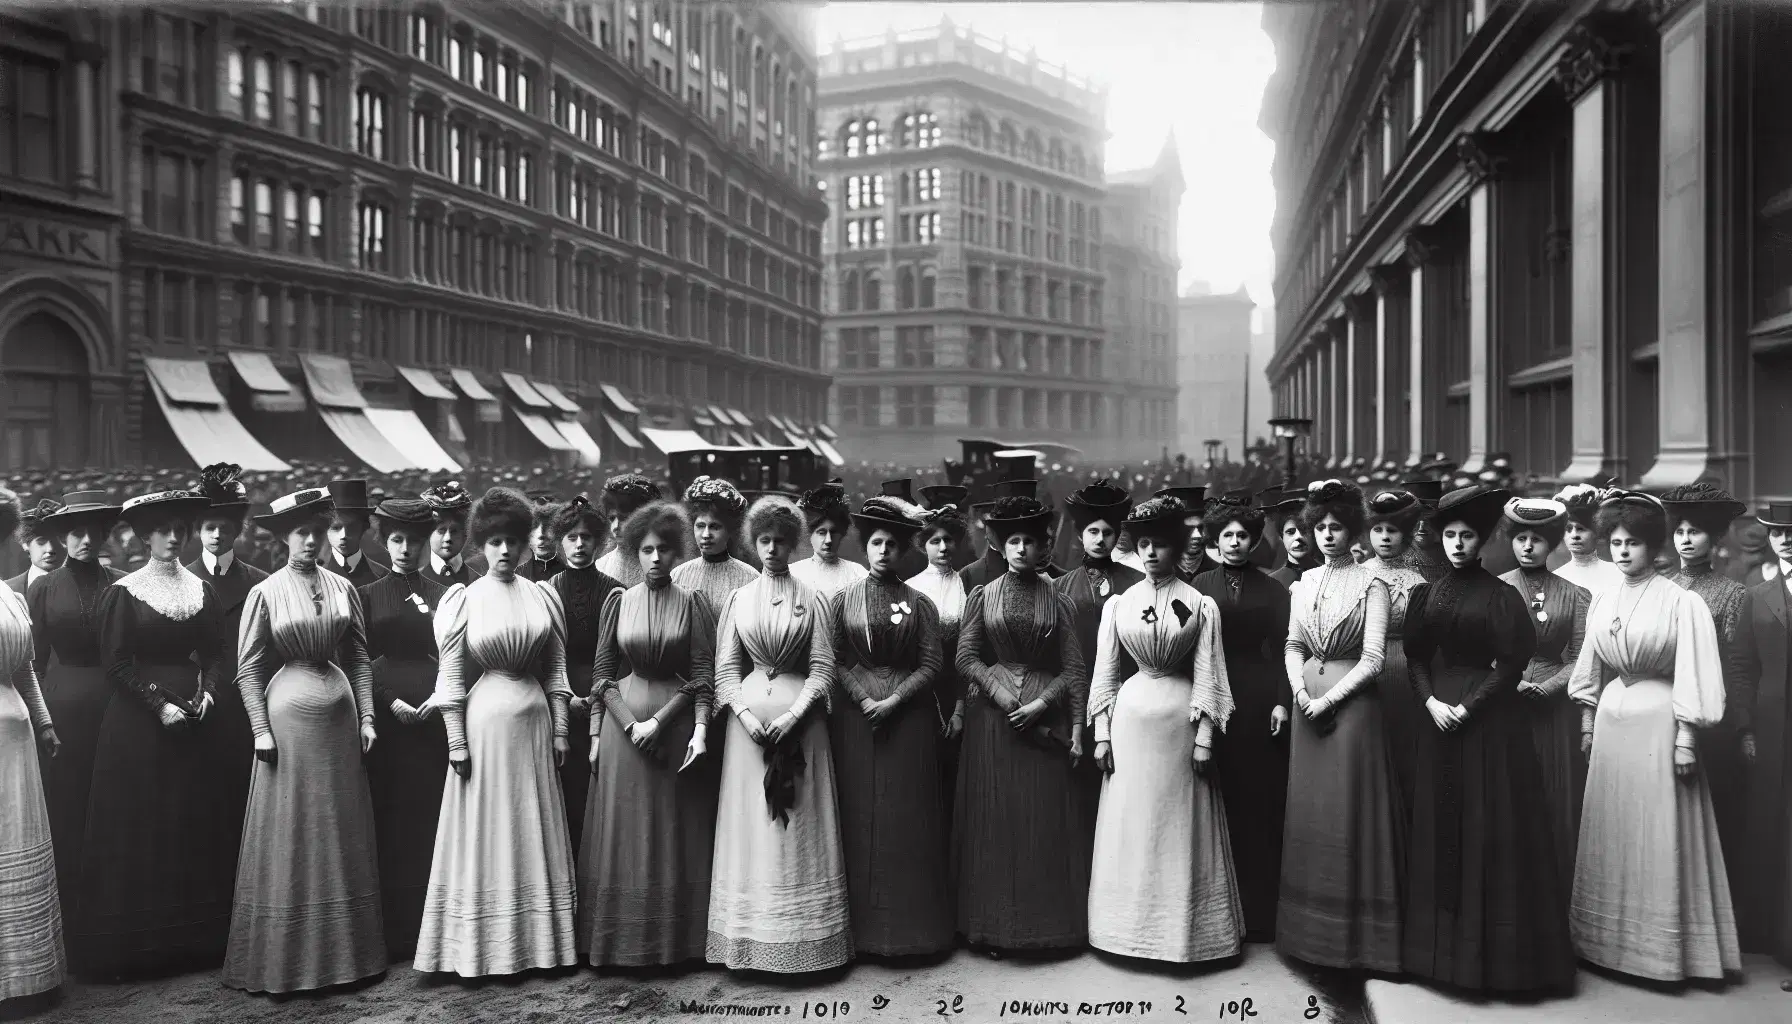 Early 20th-century photograph showing a line of women in period attire with blank banners on a bustling city street with horse-drawn carriages.